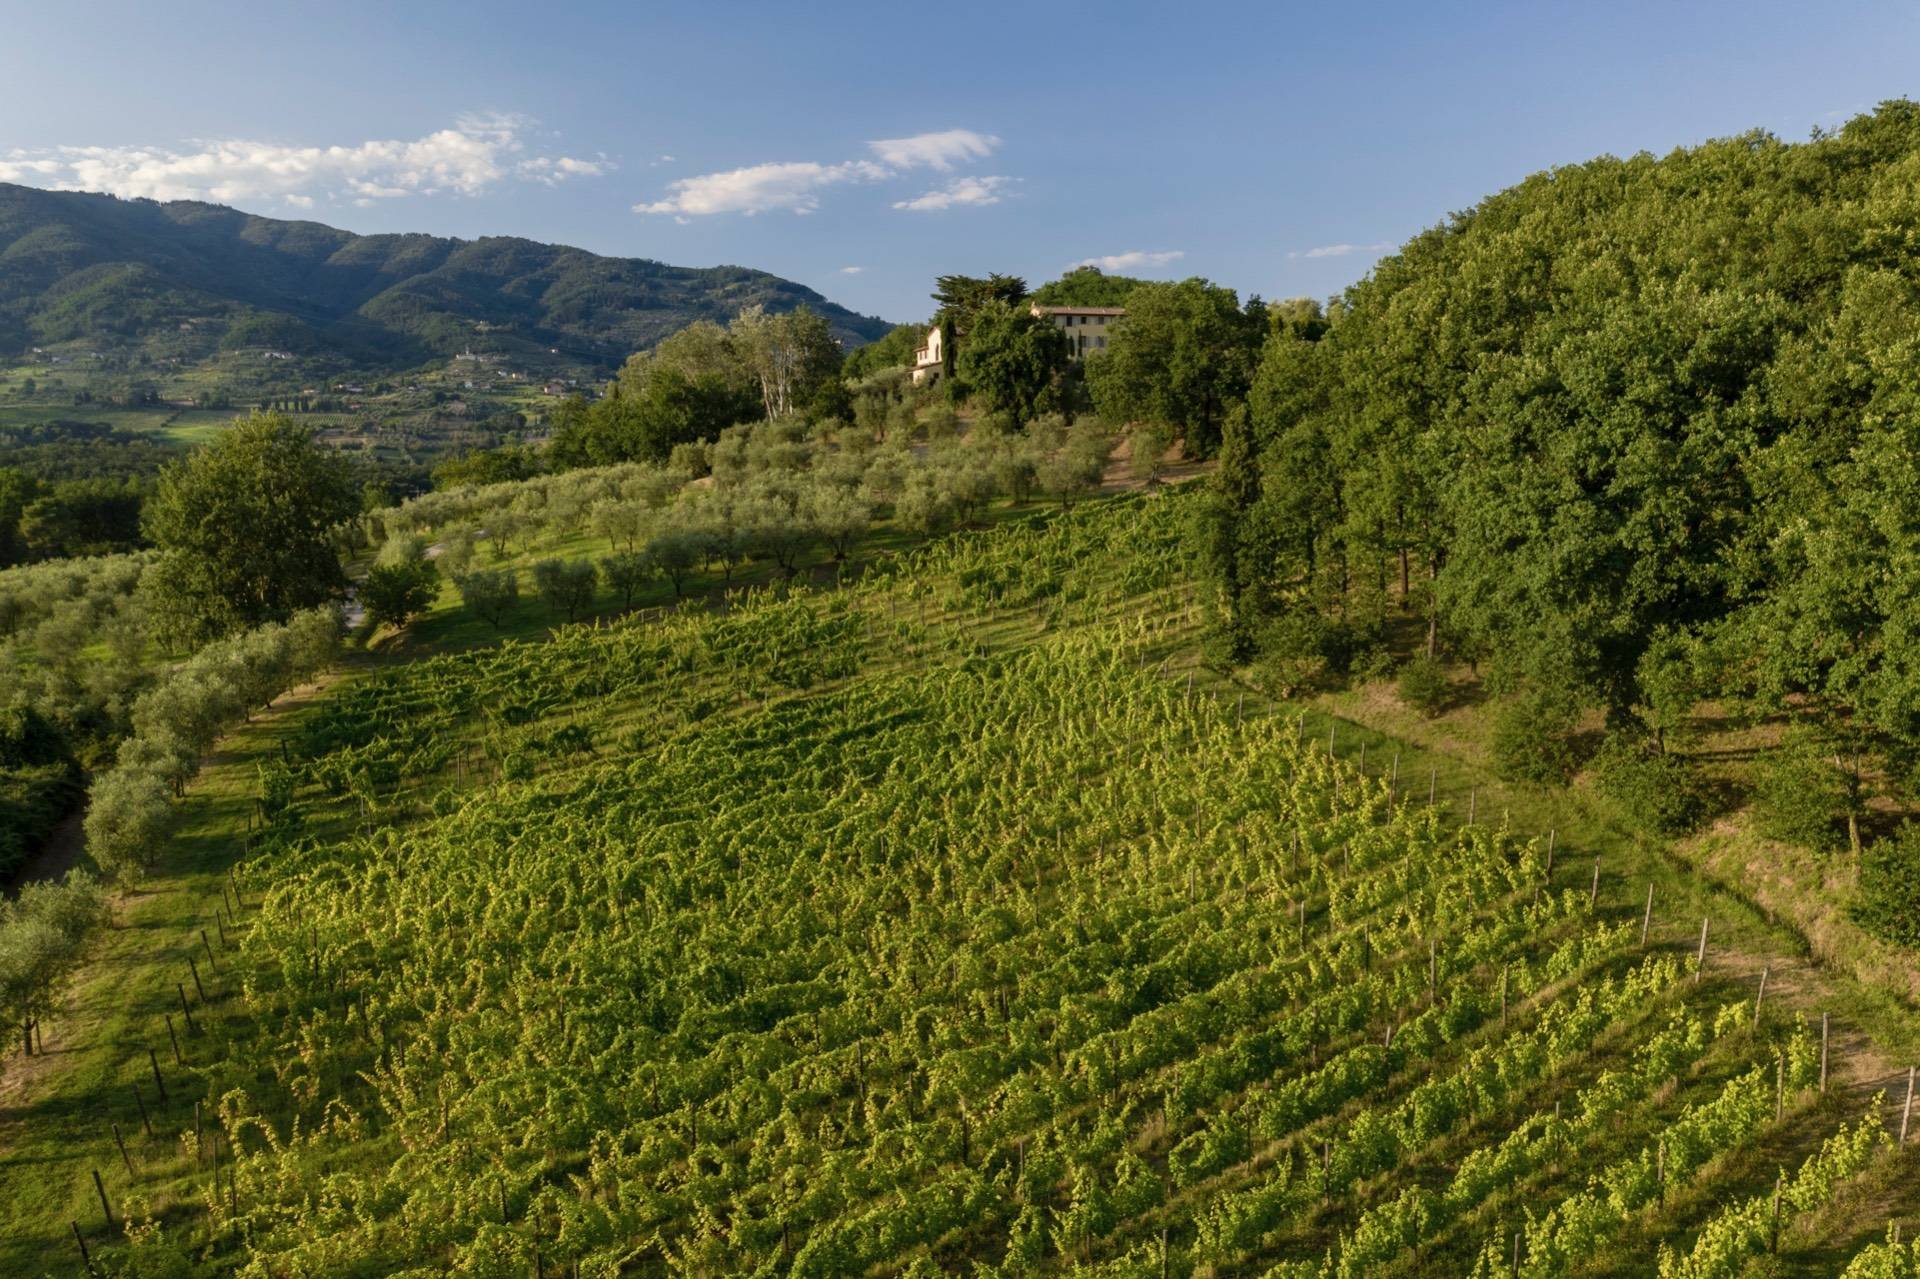 Francis York  Turnkey Italian Villa With Vineyards and Olive Groves Near Lucca 00008.jpg